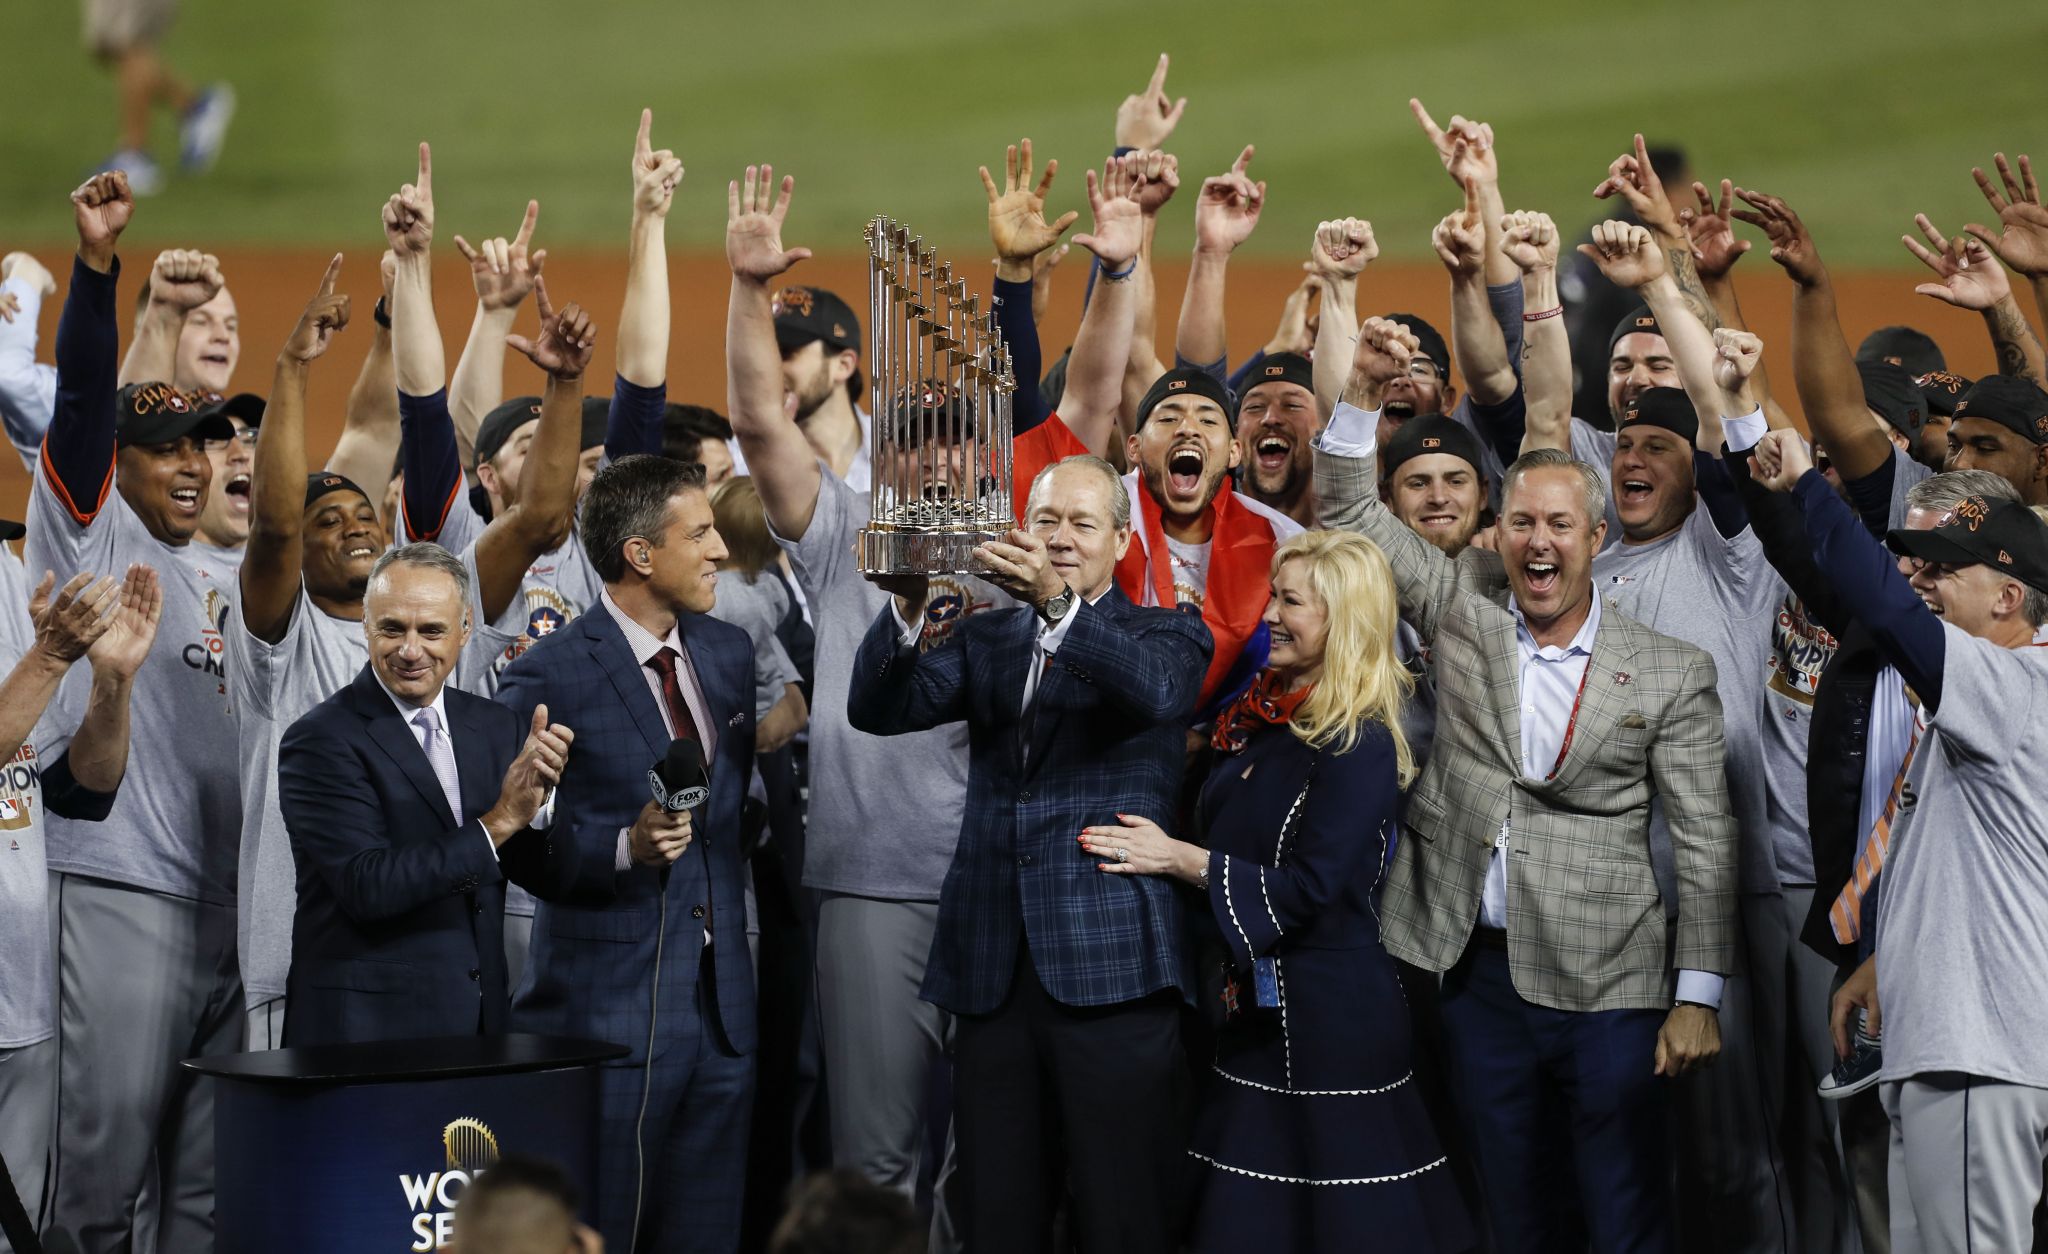 Bottoms up: Astros and MVP Springer complete stunning rise, win World Series